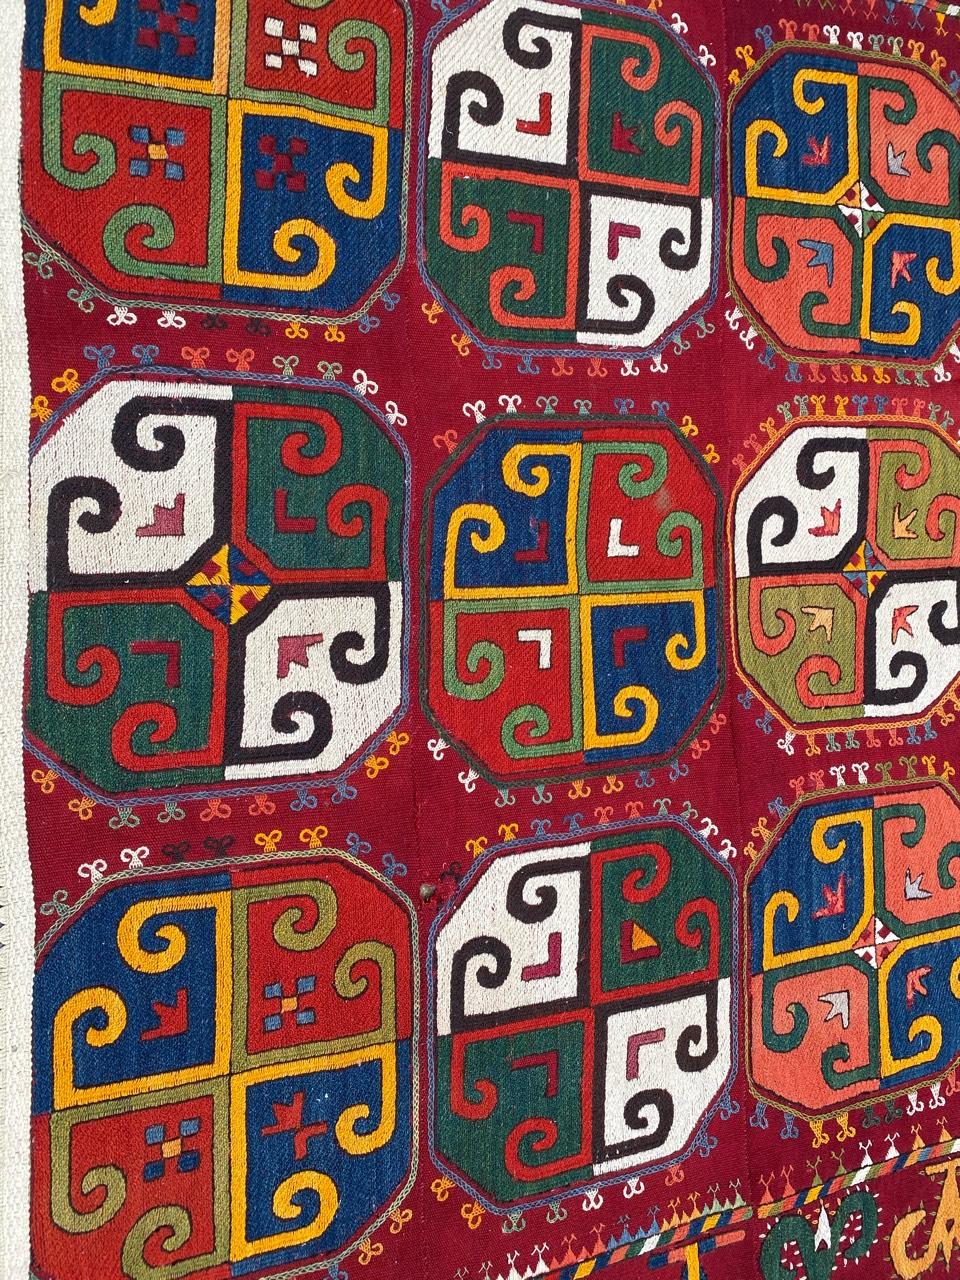 Discover the exquisite craftsmanship of a stunning early 20th-century Uzbek embroidery. Adorned with a captivating Bokhara design, this piece boasts beautiful geometrical patterns and vibrant natural colors. Meticulously handwoven and embroidered